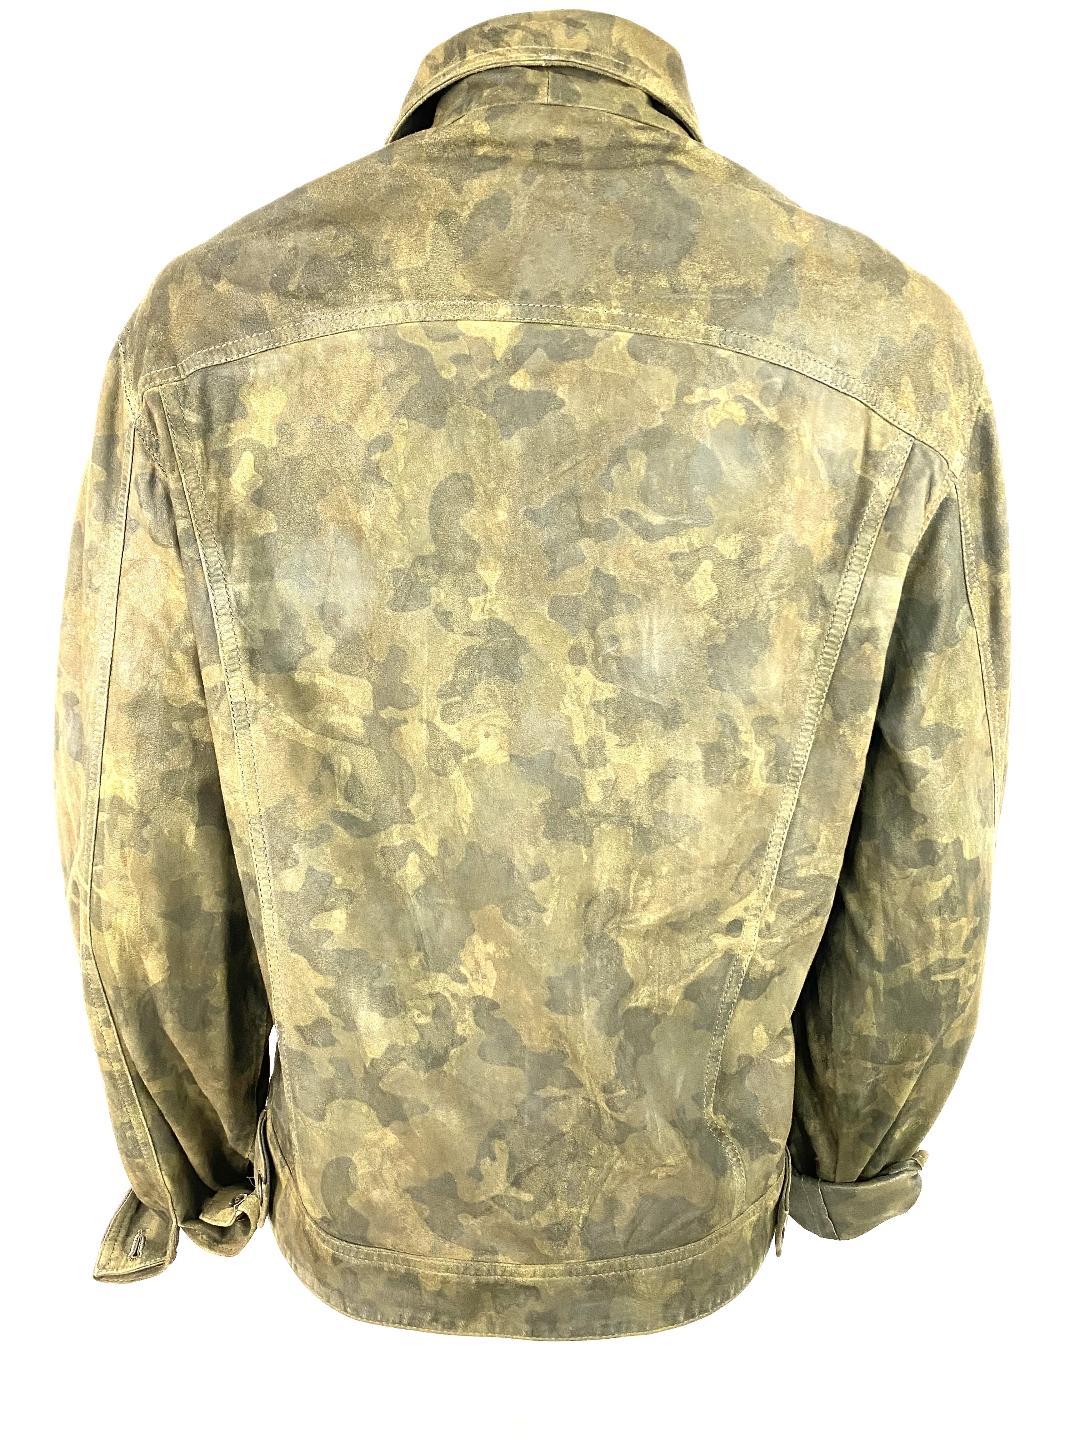 Gray Faith Connextion Green Camouflage Jacket, Size Medium For Sale